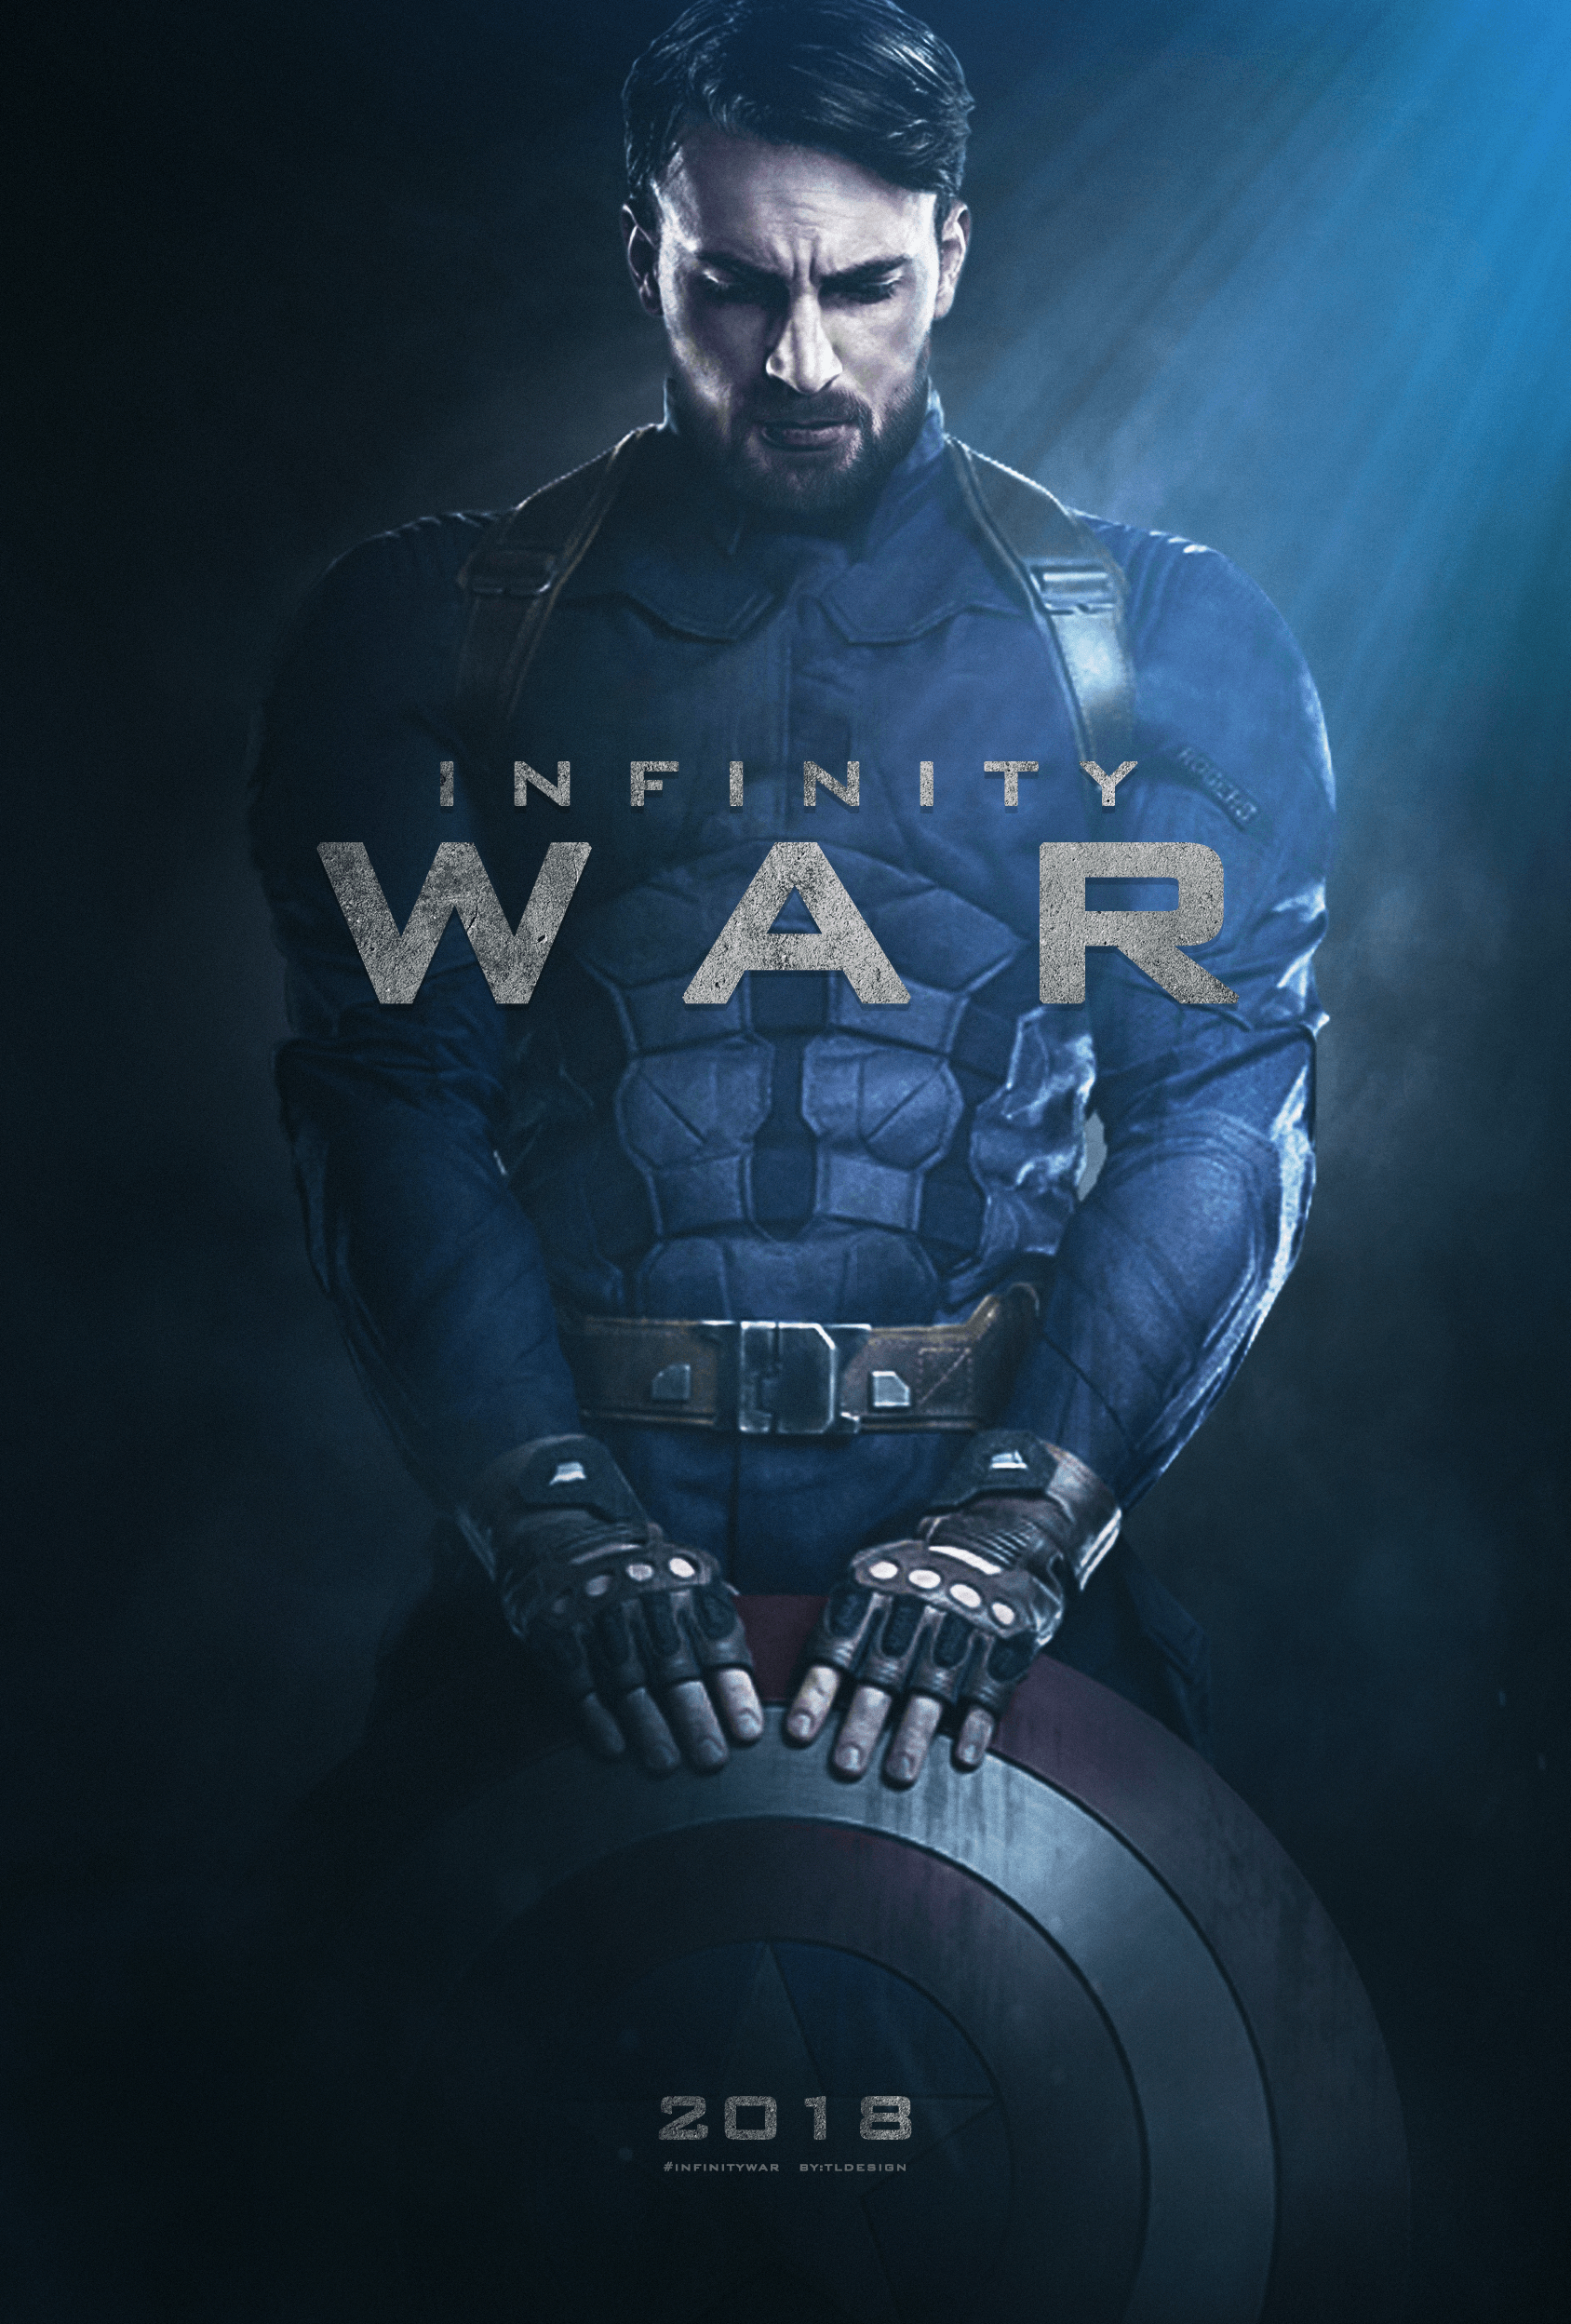 I made Captain America character poster for Infinity War